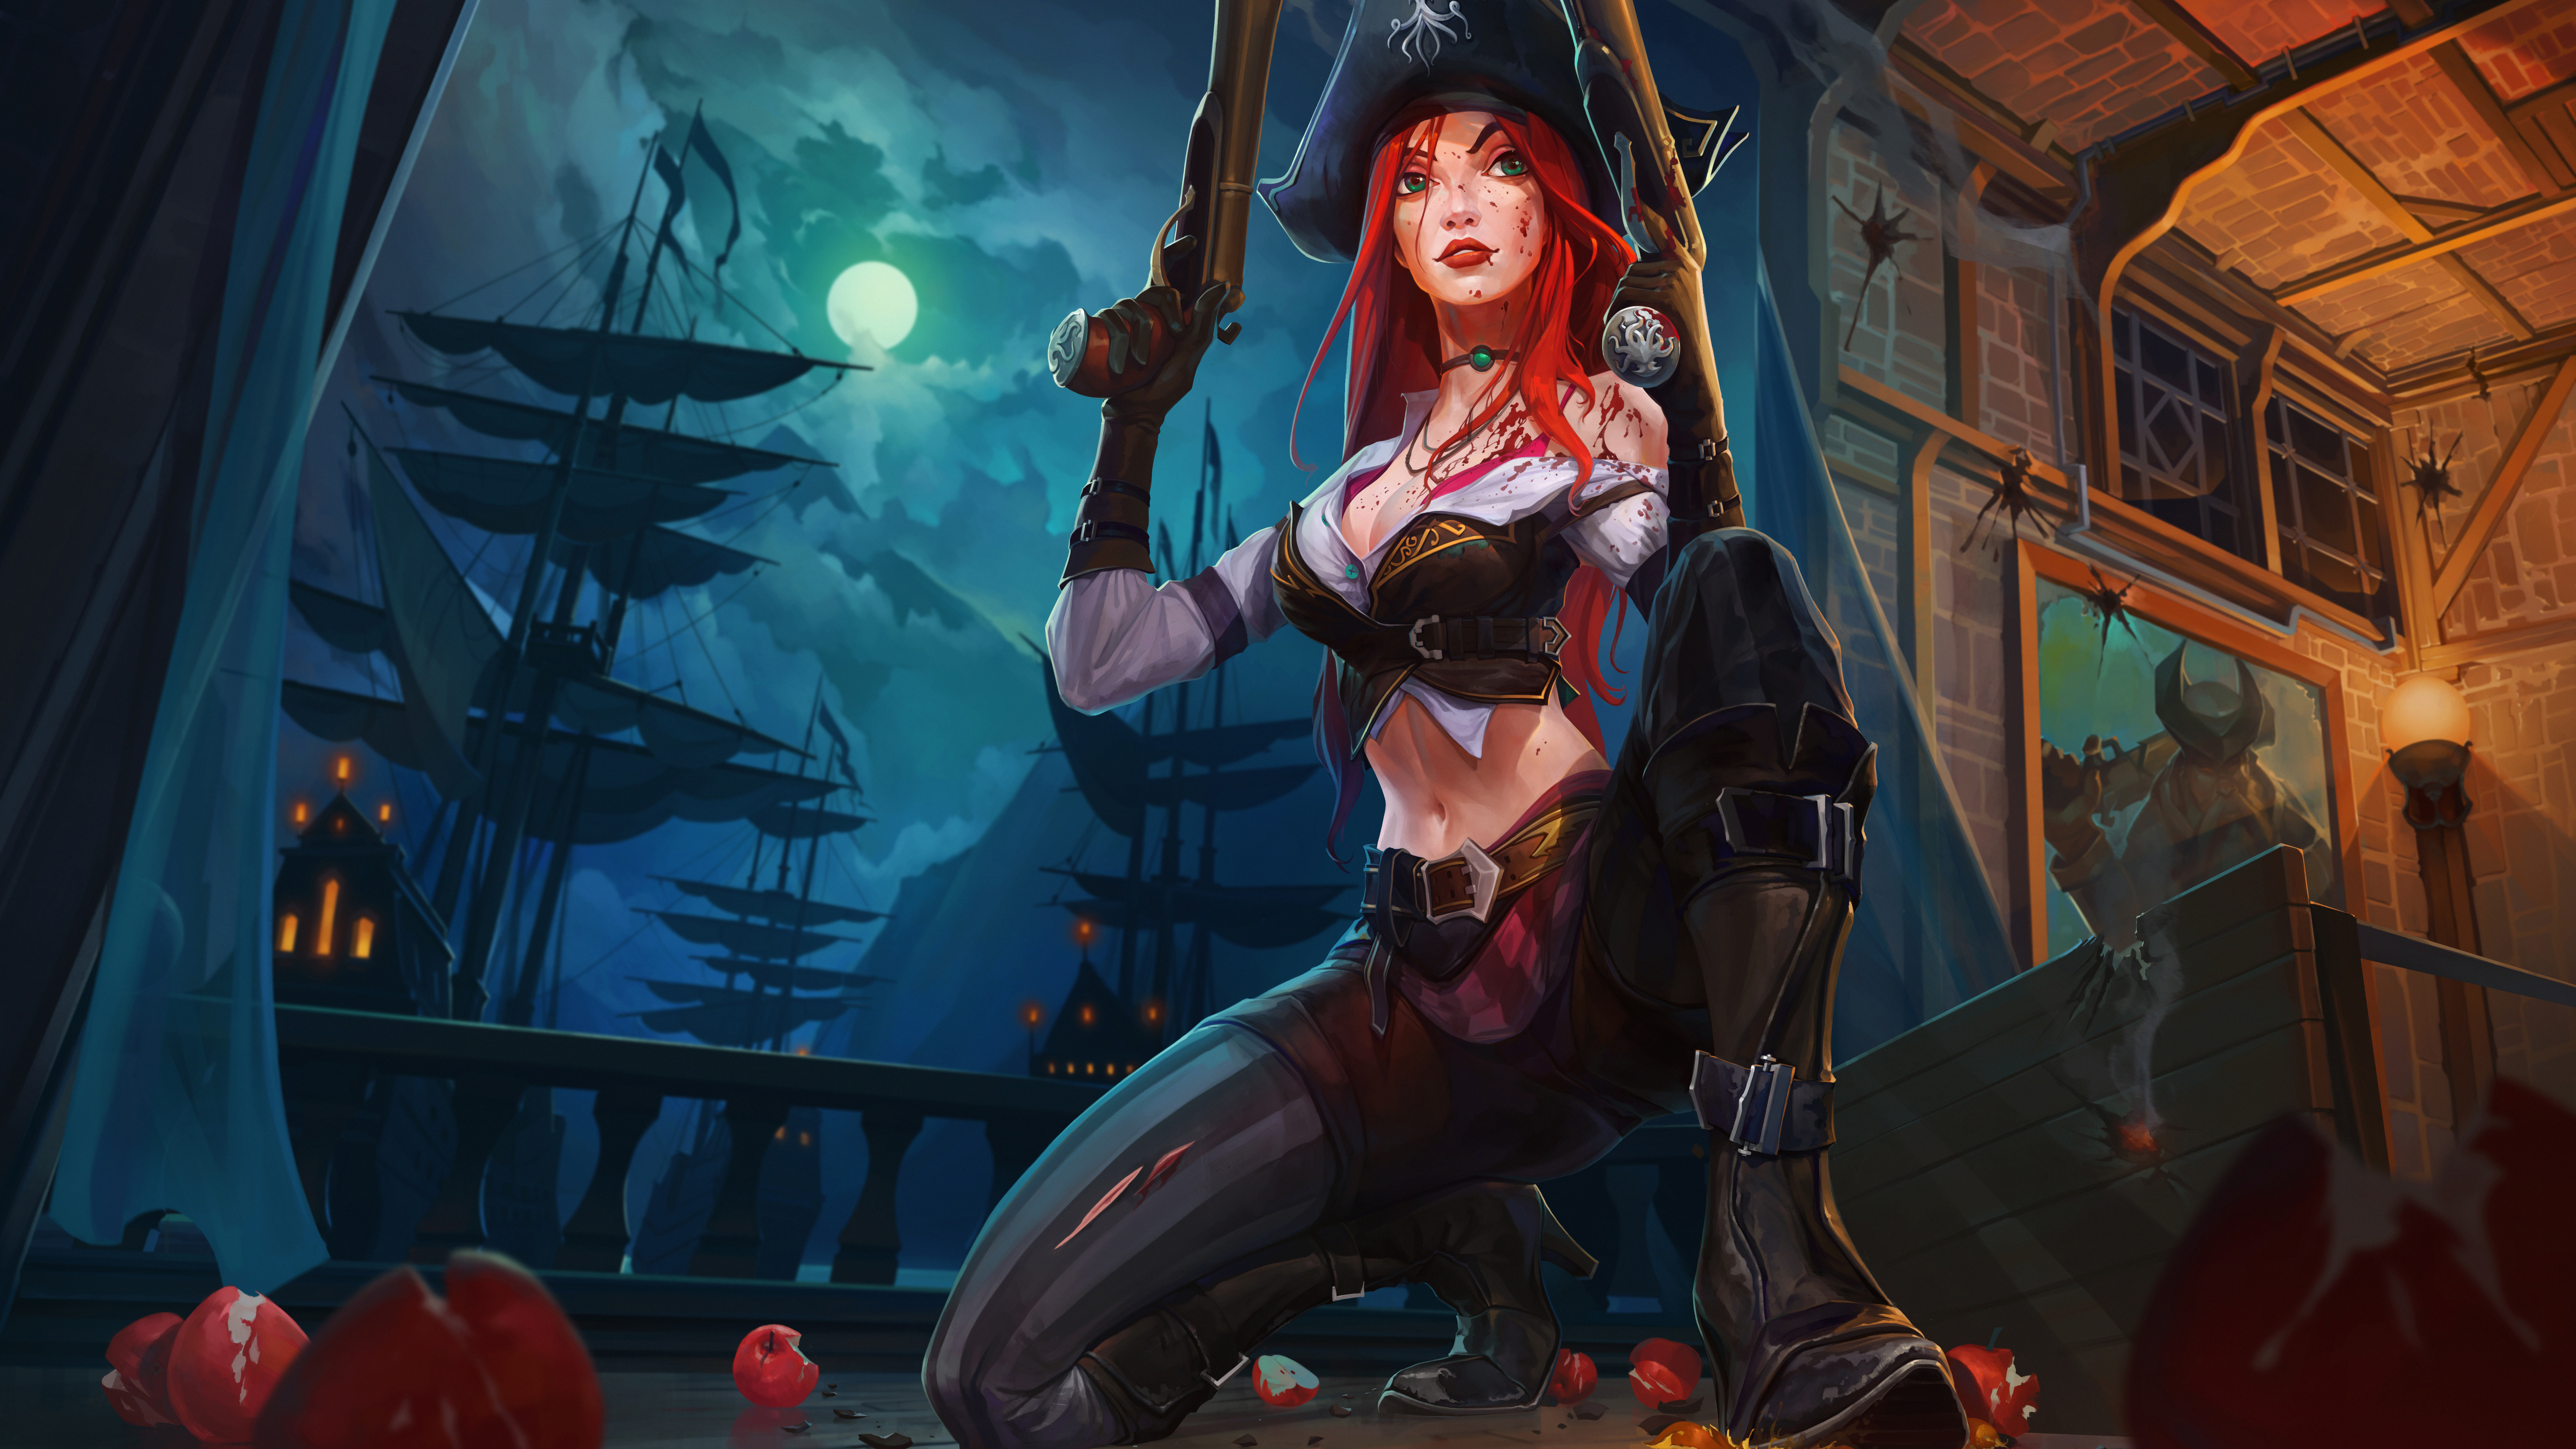 7680X4320 Miss Fortune League Of Legends 8K 8K Hd 4K Wallpapers, Images, Backgrounds -4433